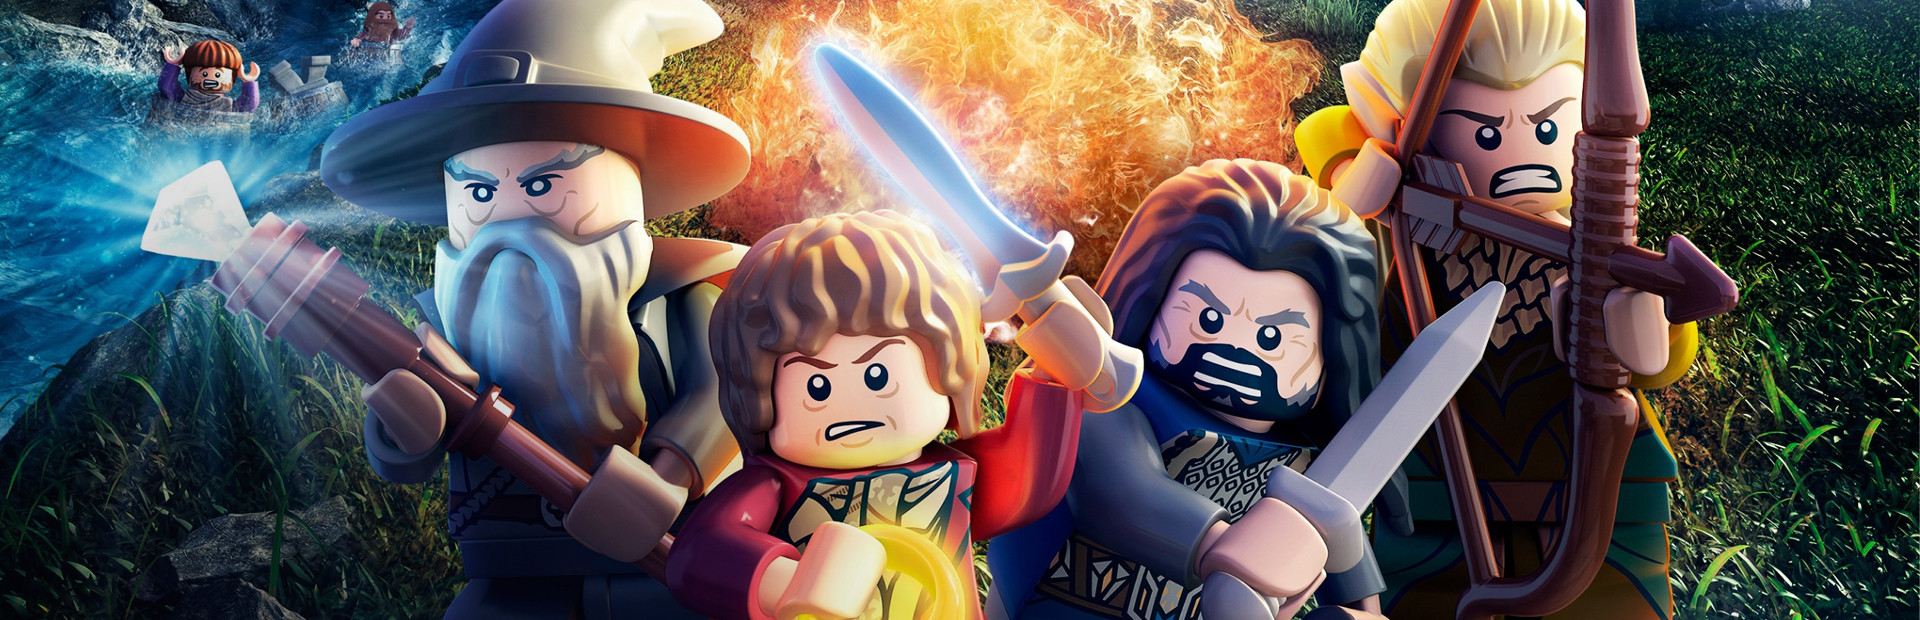 LEGO® The Hobbit™ cover image